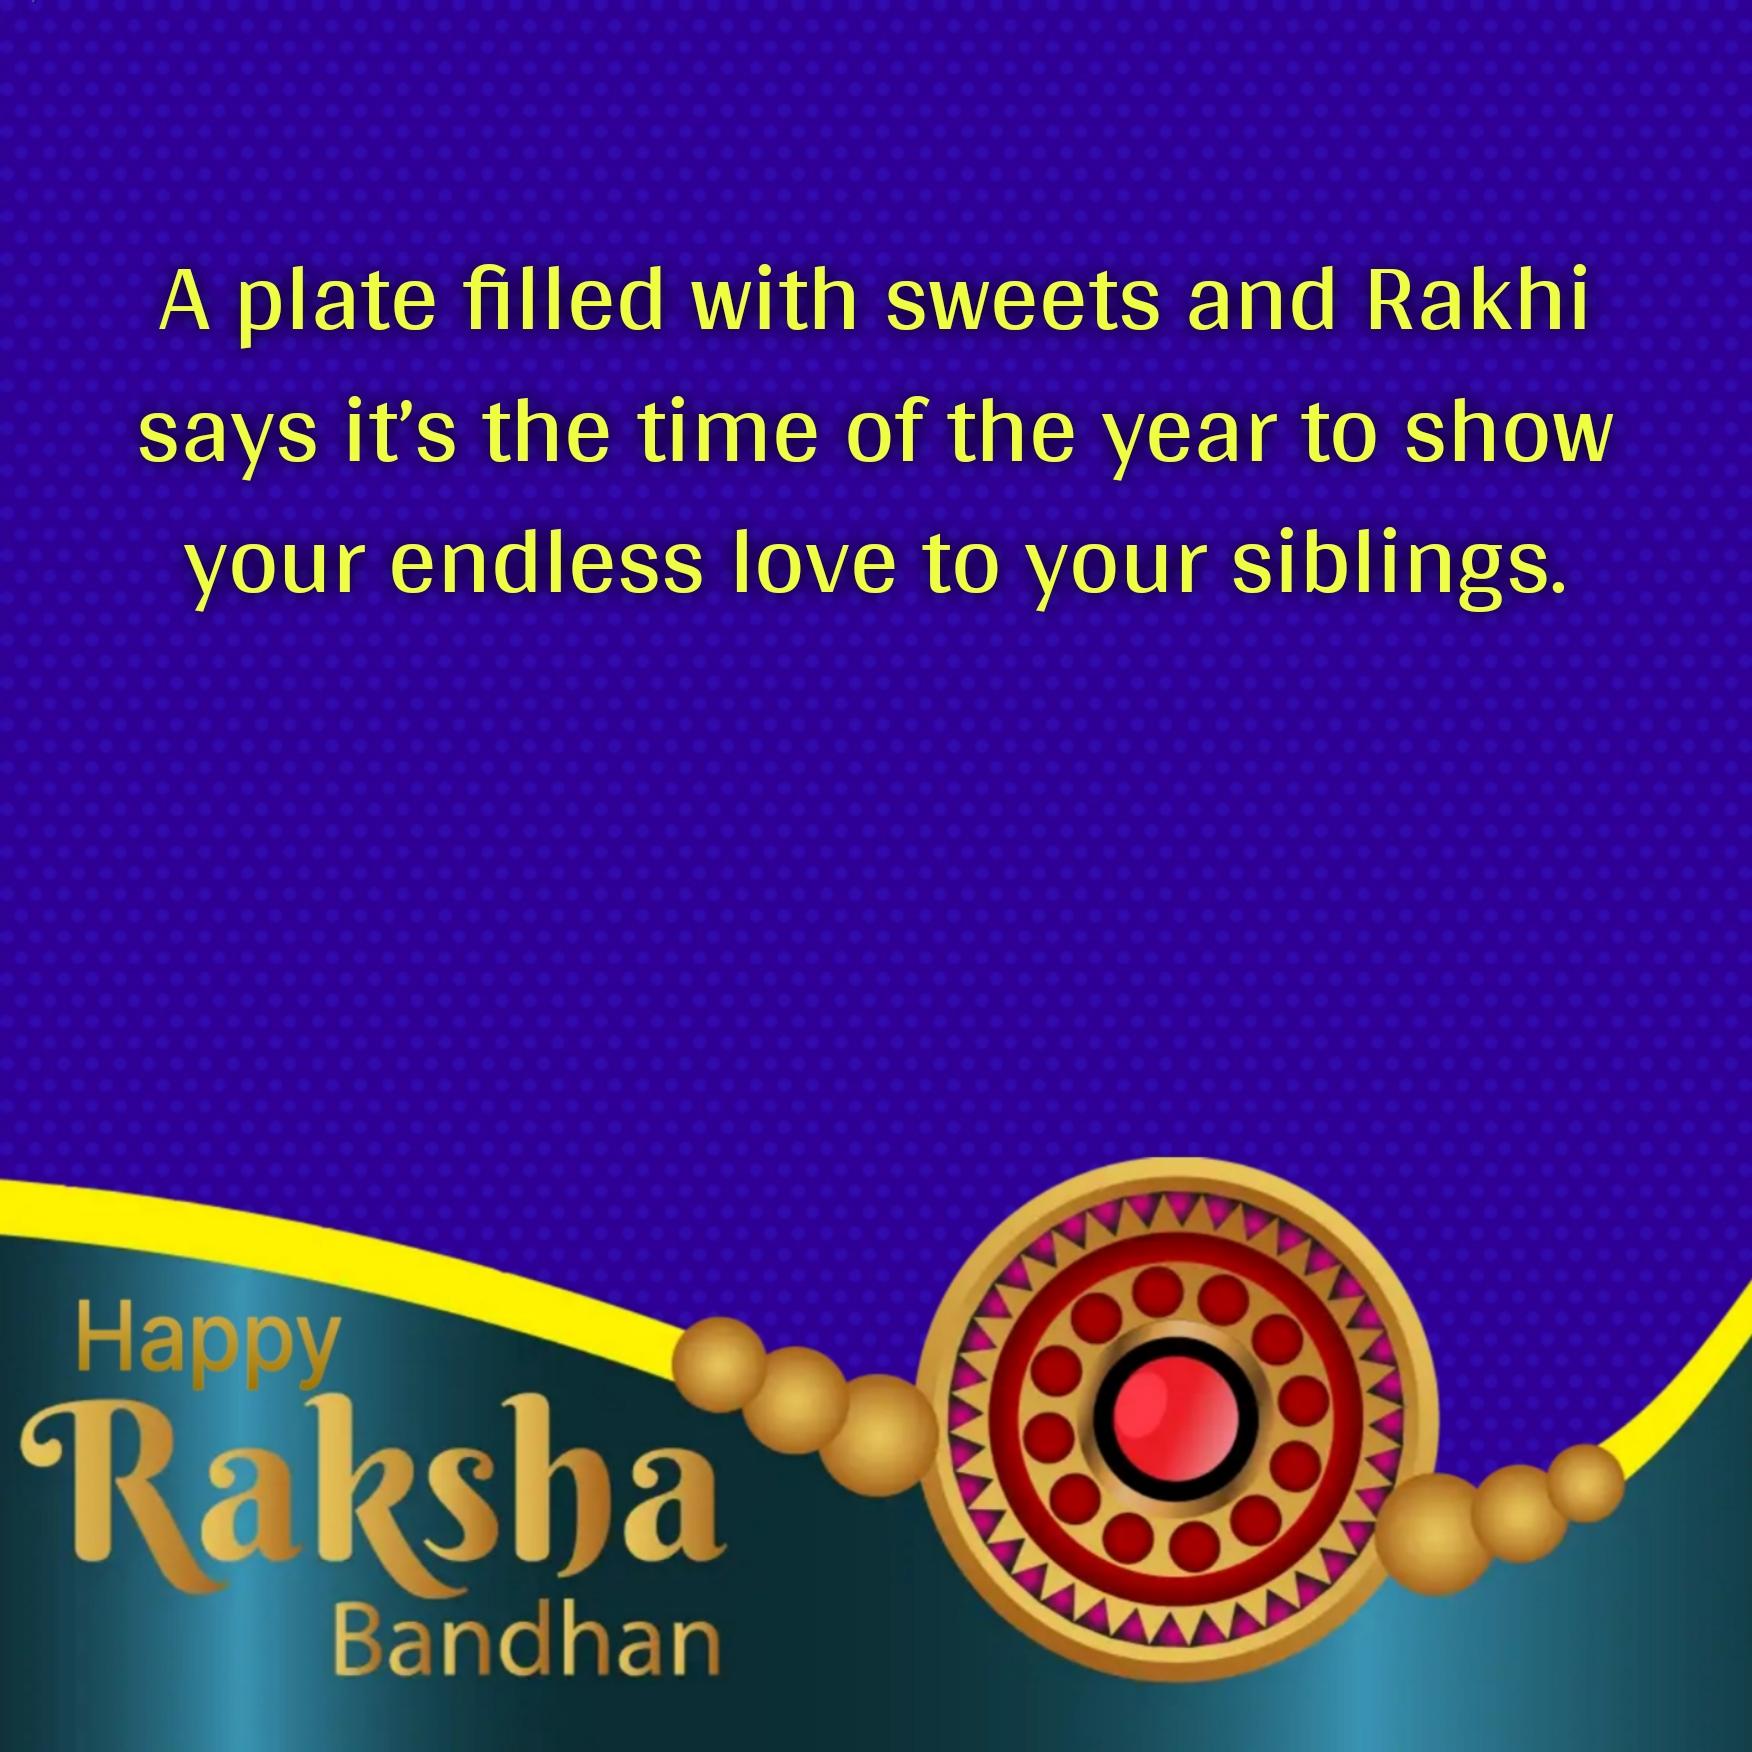 A plate filled with sweets and Rakhi says